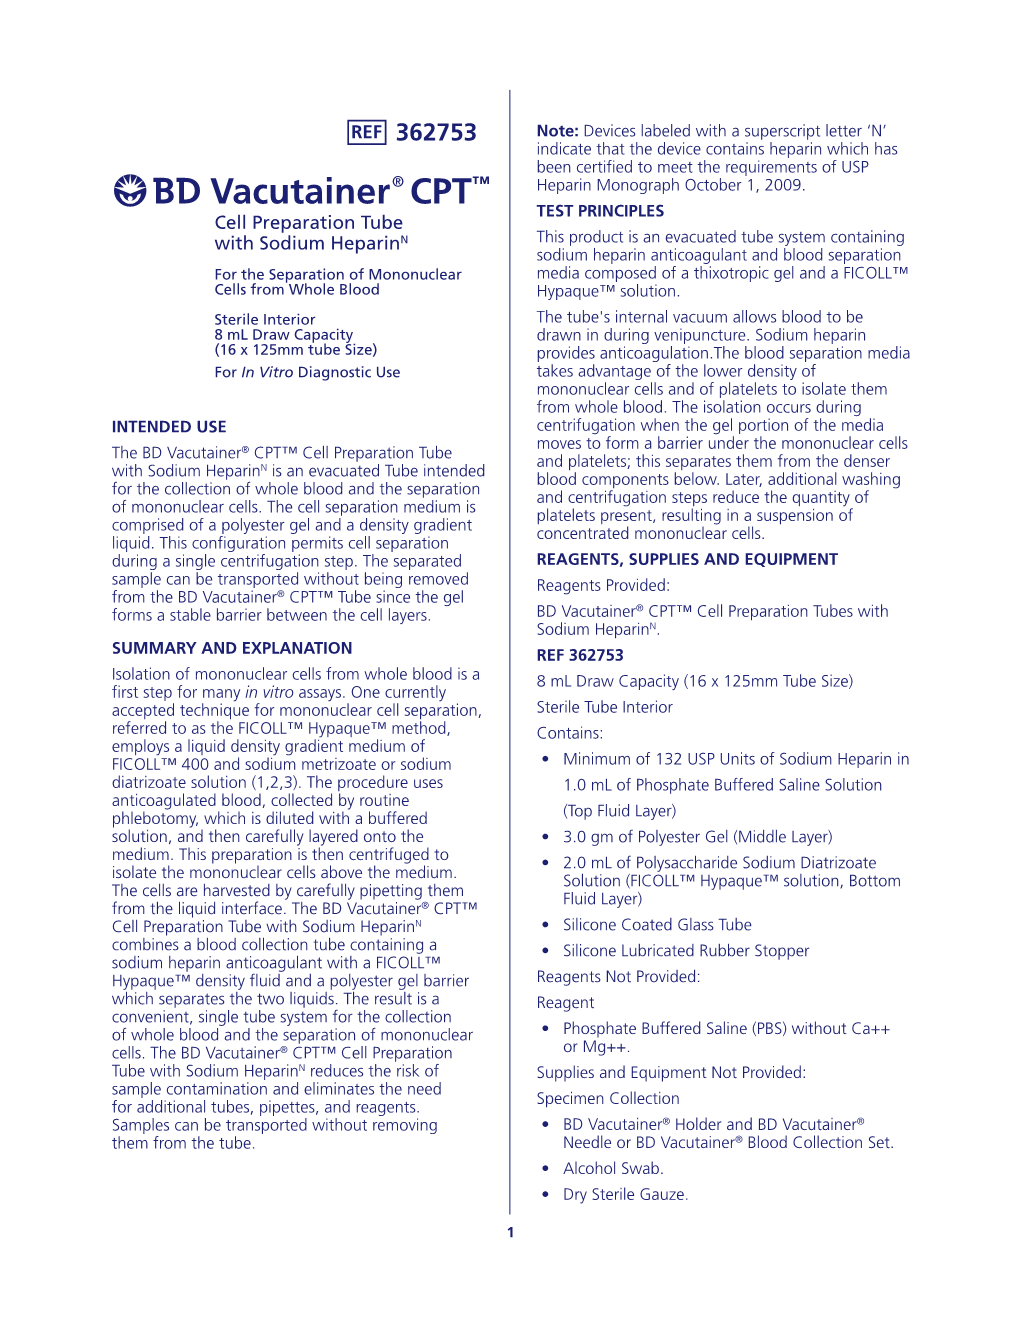 BD Vacutainer® CPT™ Cell Preparation Tube with Sodium